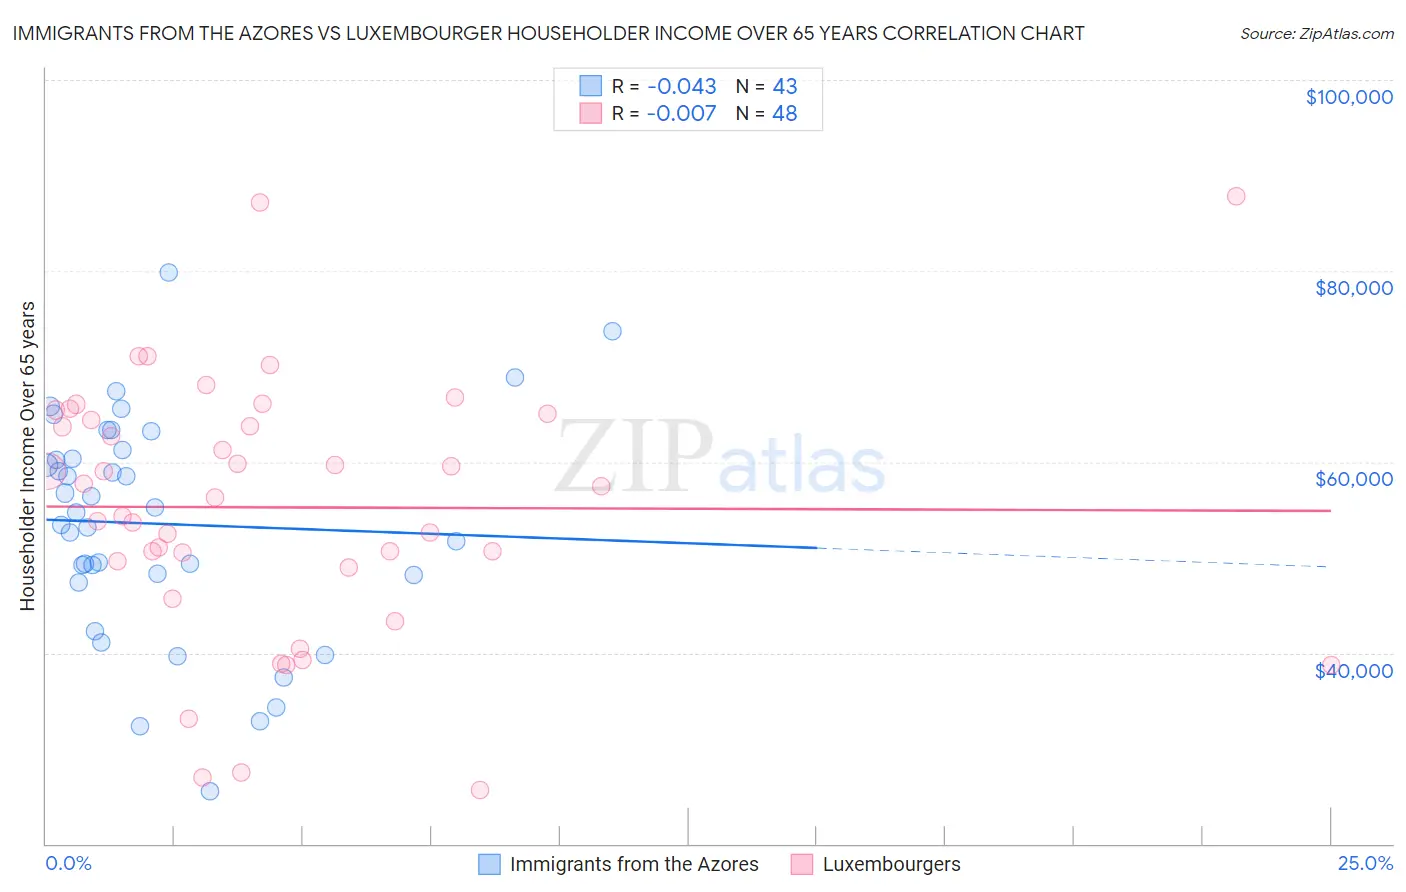 Immigrants from the Azores vs Luxembourger Householder Income Over 65 years